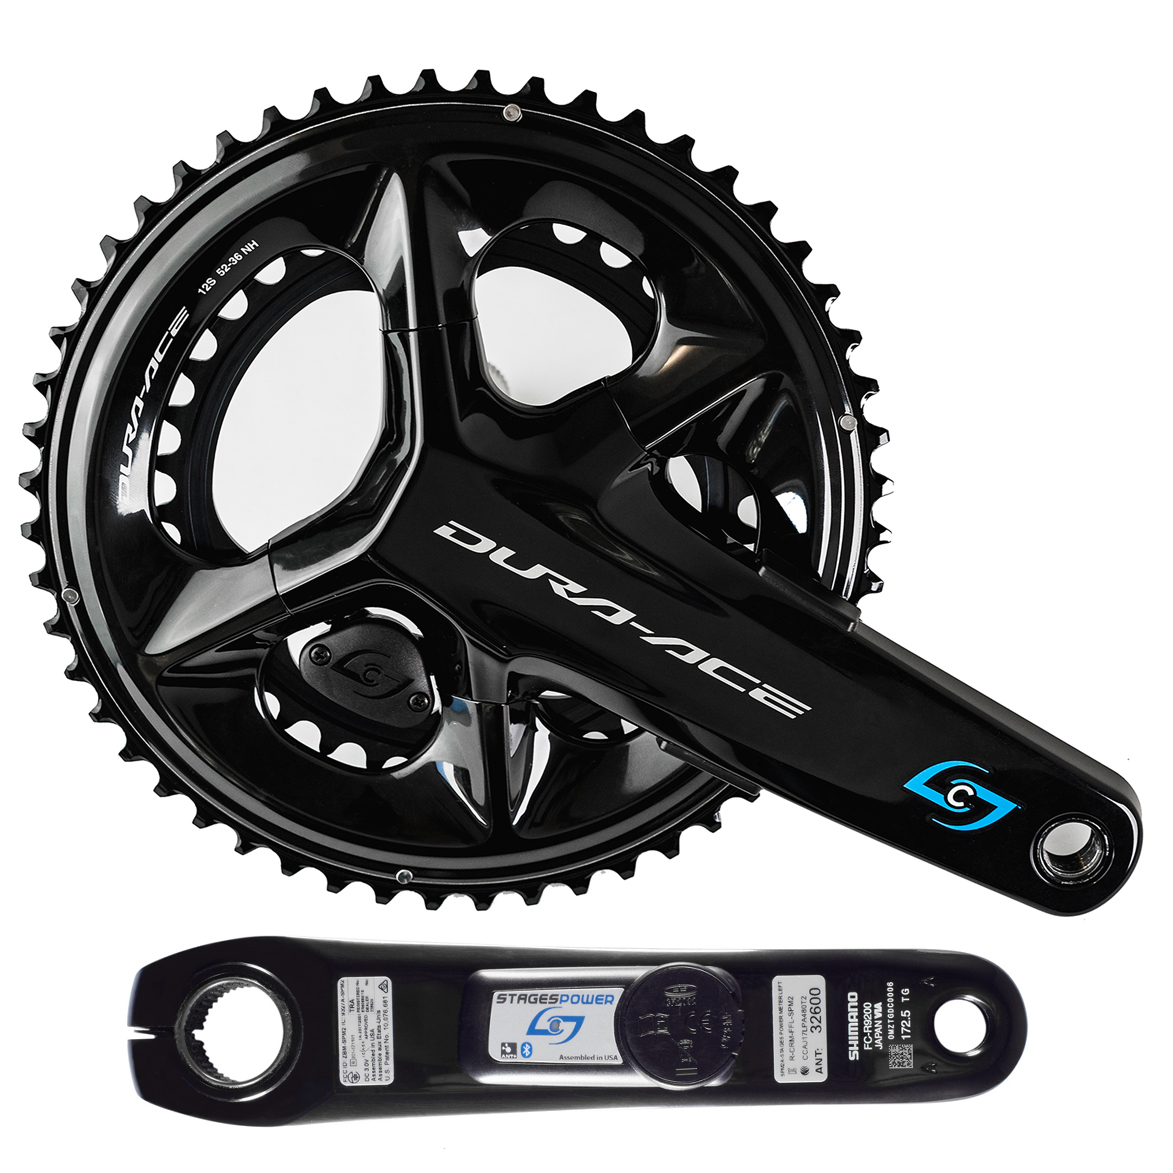 Picture of Stages Cycling Power LR Powermeter | Crankset by Shimano - Dura Ace R9200 | 2x12-speed - black